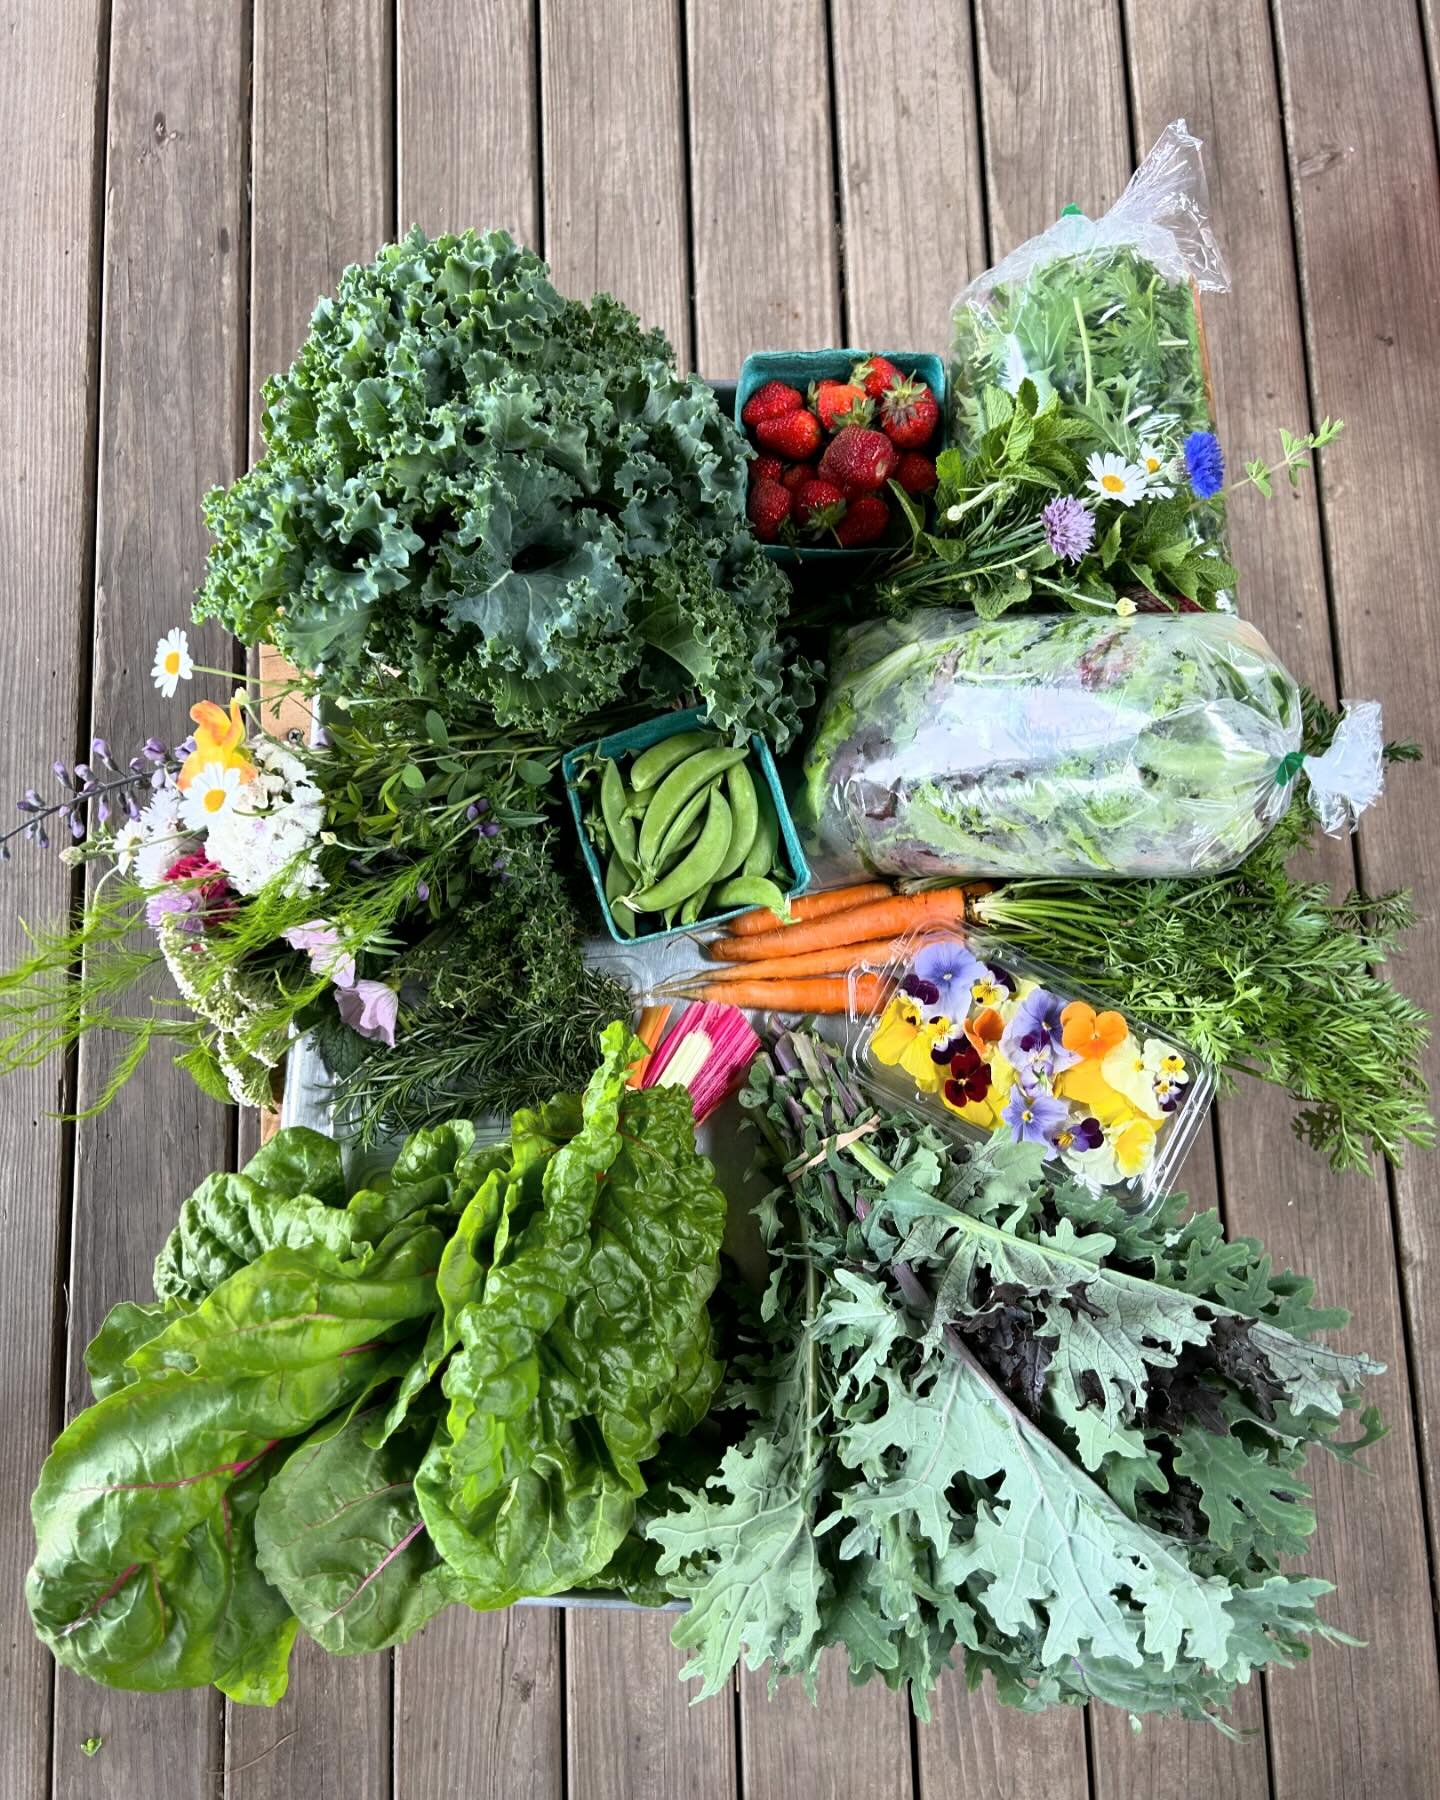 Check out our beautiful spring bounty! So many greens, herbs, flowers and a bumper crop of strawberries! Our Farmstand is open from 4-7pm today. Walk ups only. Cash, credit, Venmo, Apple wallet. Pay the suggested price or pay what you can! 

#knowyou